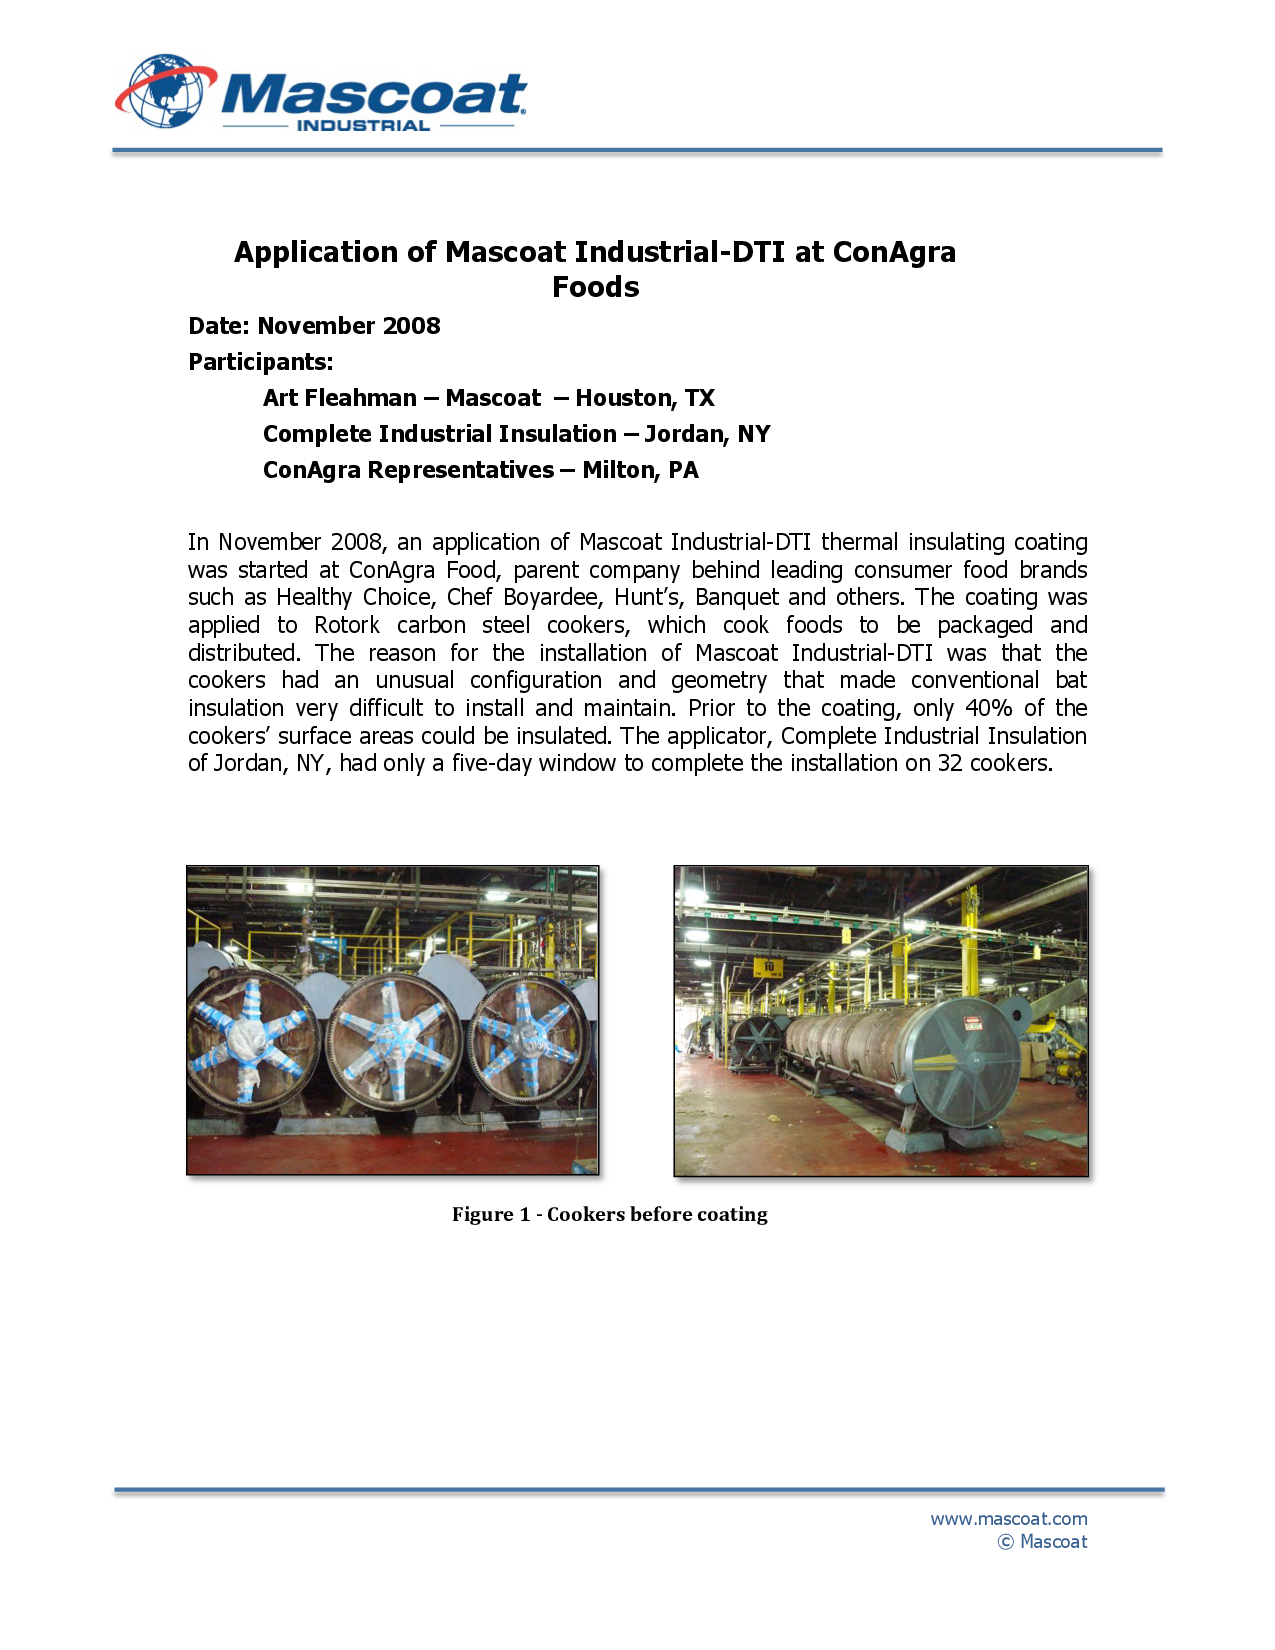 Application Of Mascoat Industrial - DTI At ConAgra Foods